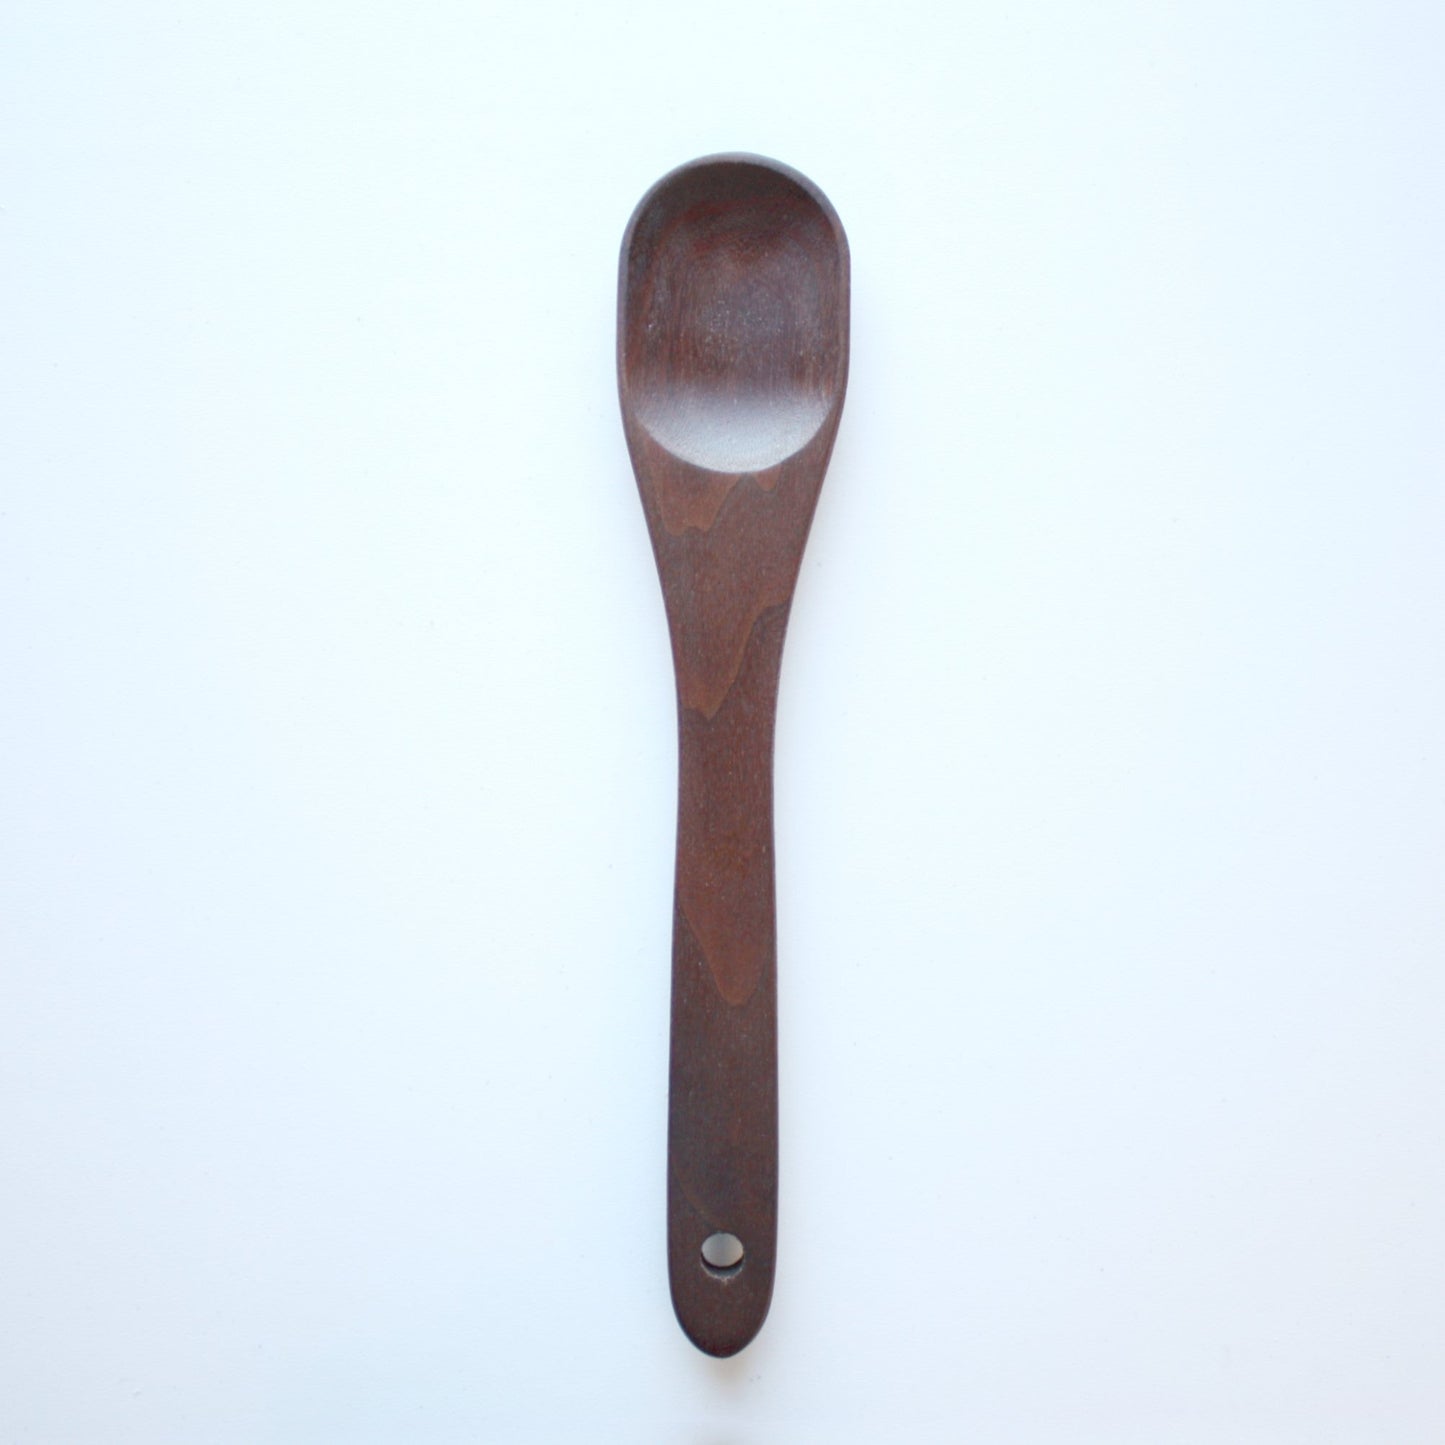 Handmade Everyday Wooden Spoon - Made in the USA